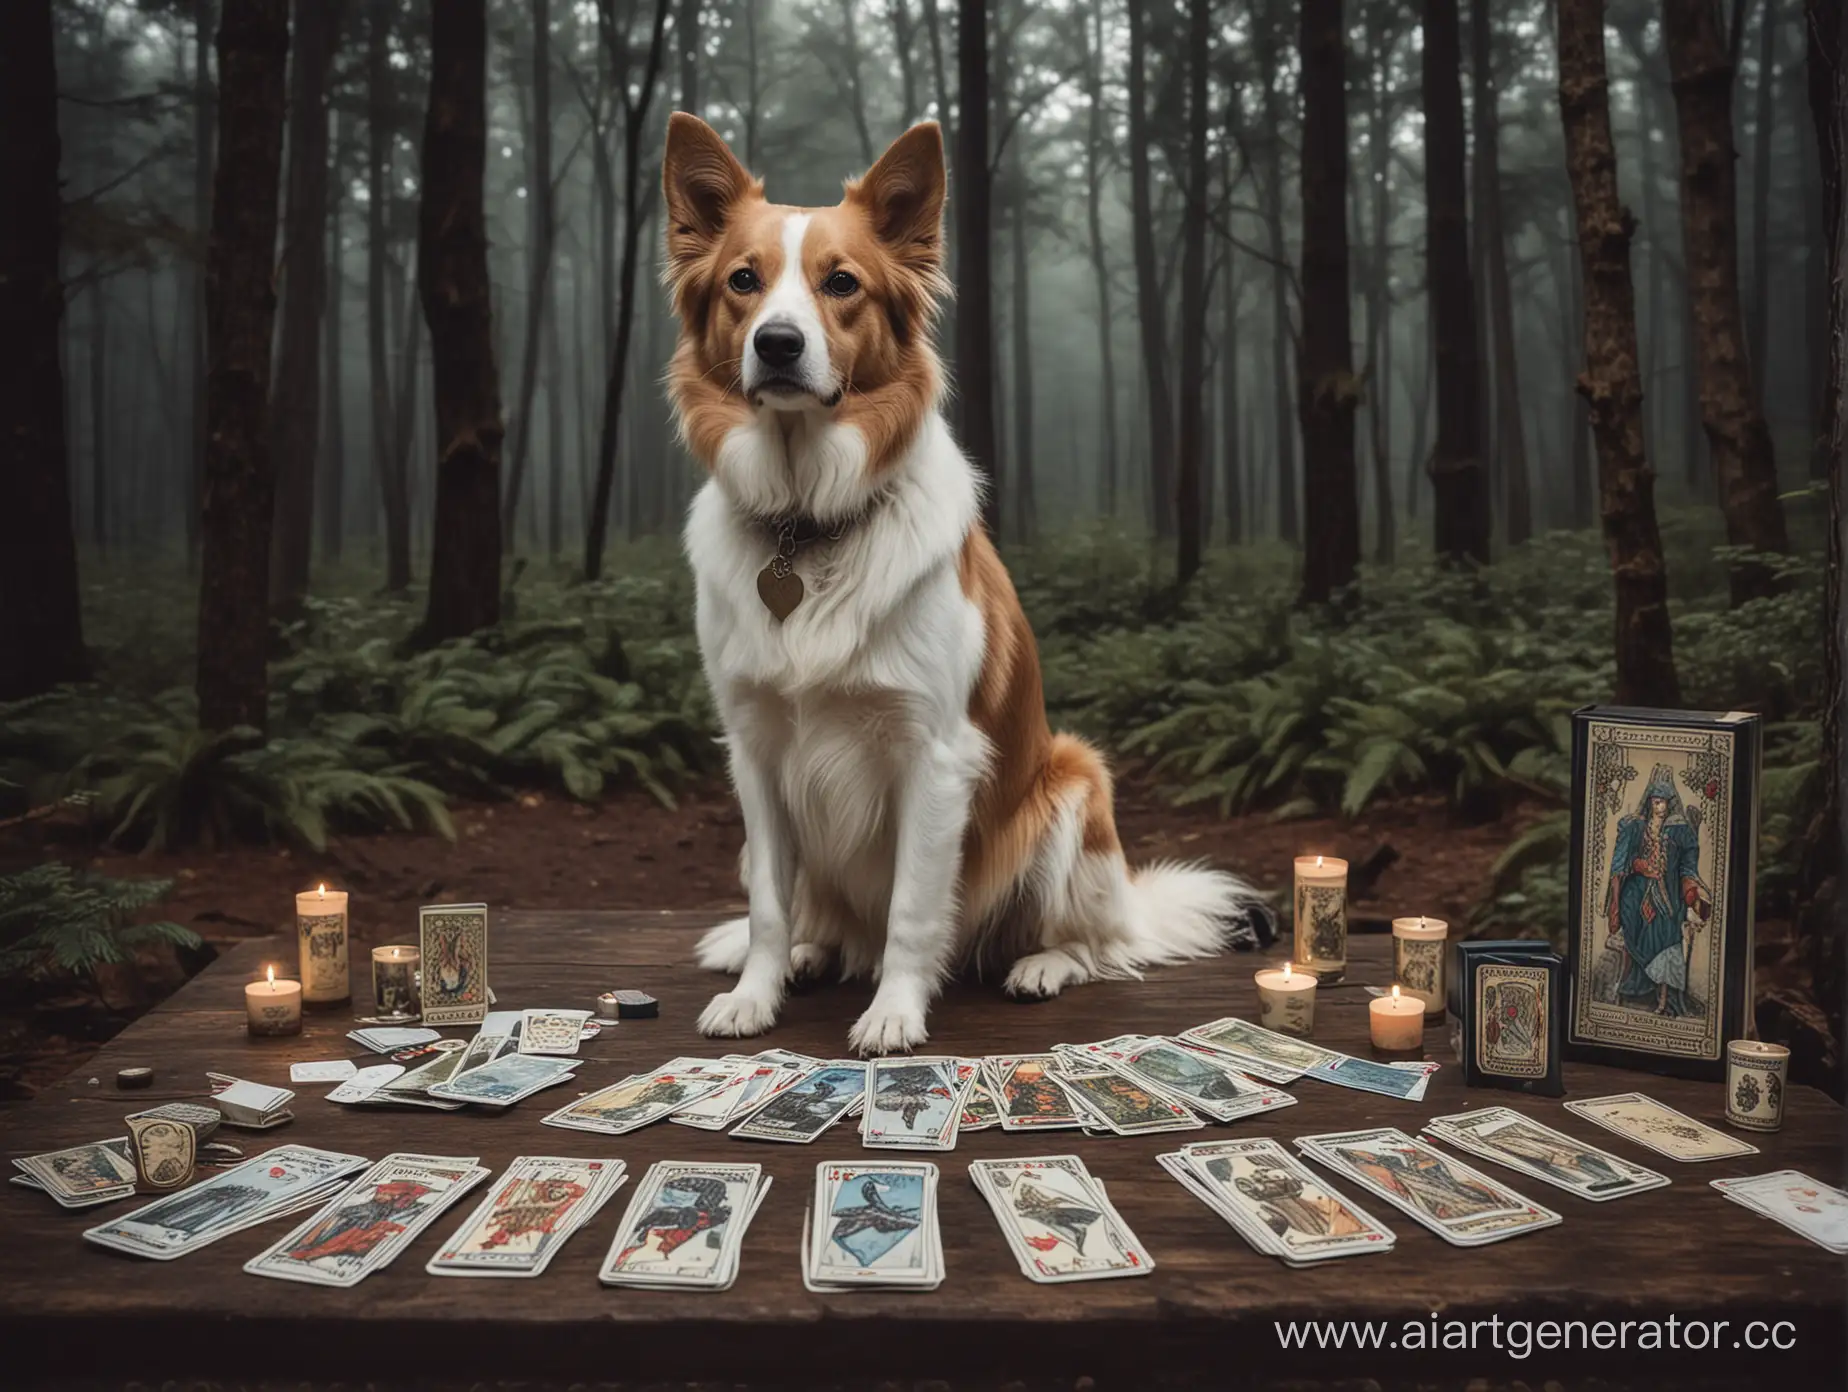 Sitting-Dog-with-Tarot-Cards-in-Dark-Forest-Setting